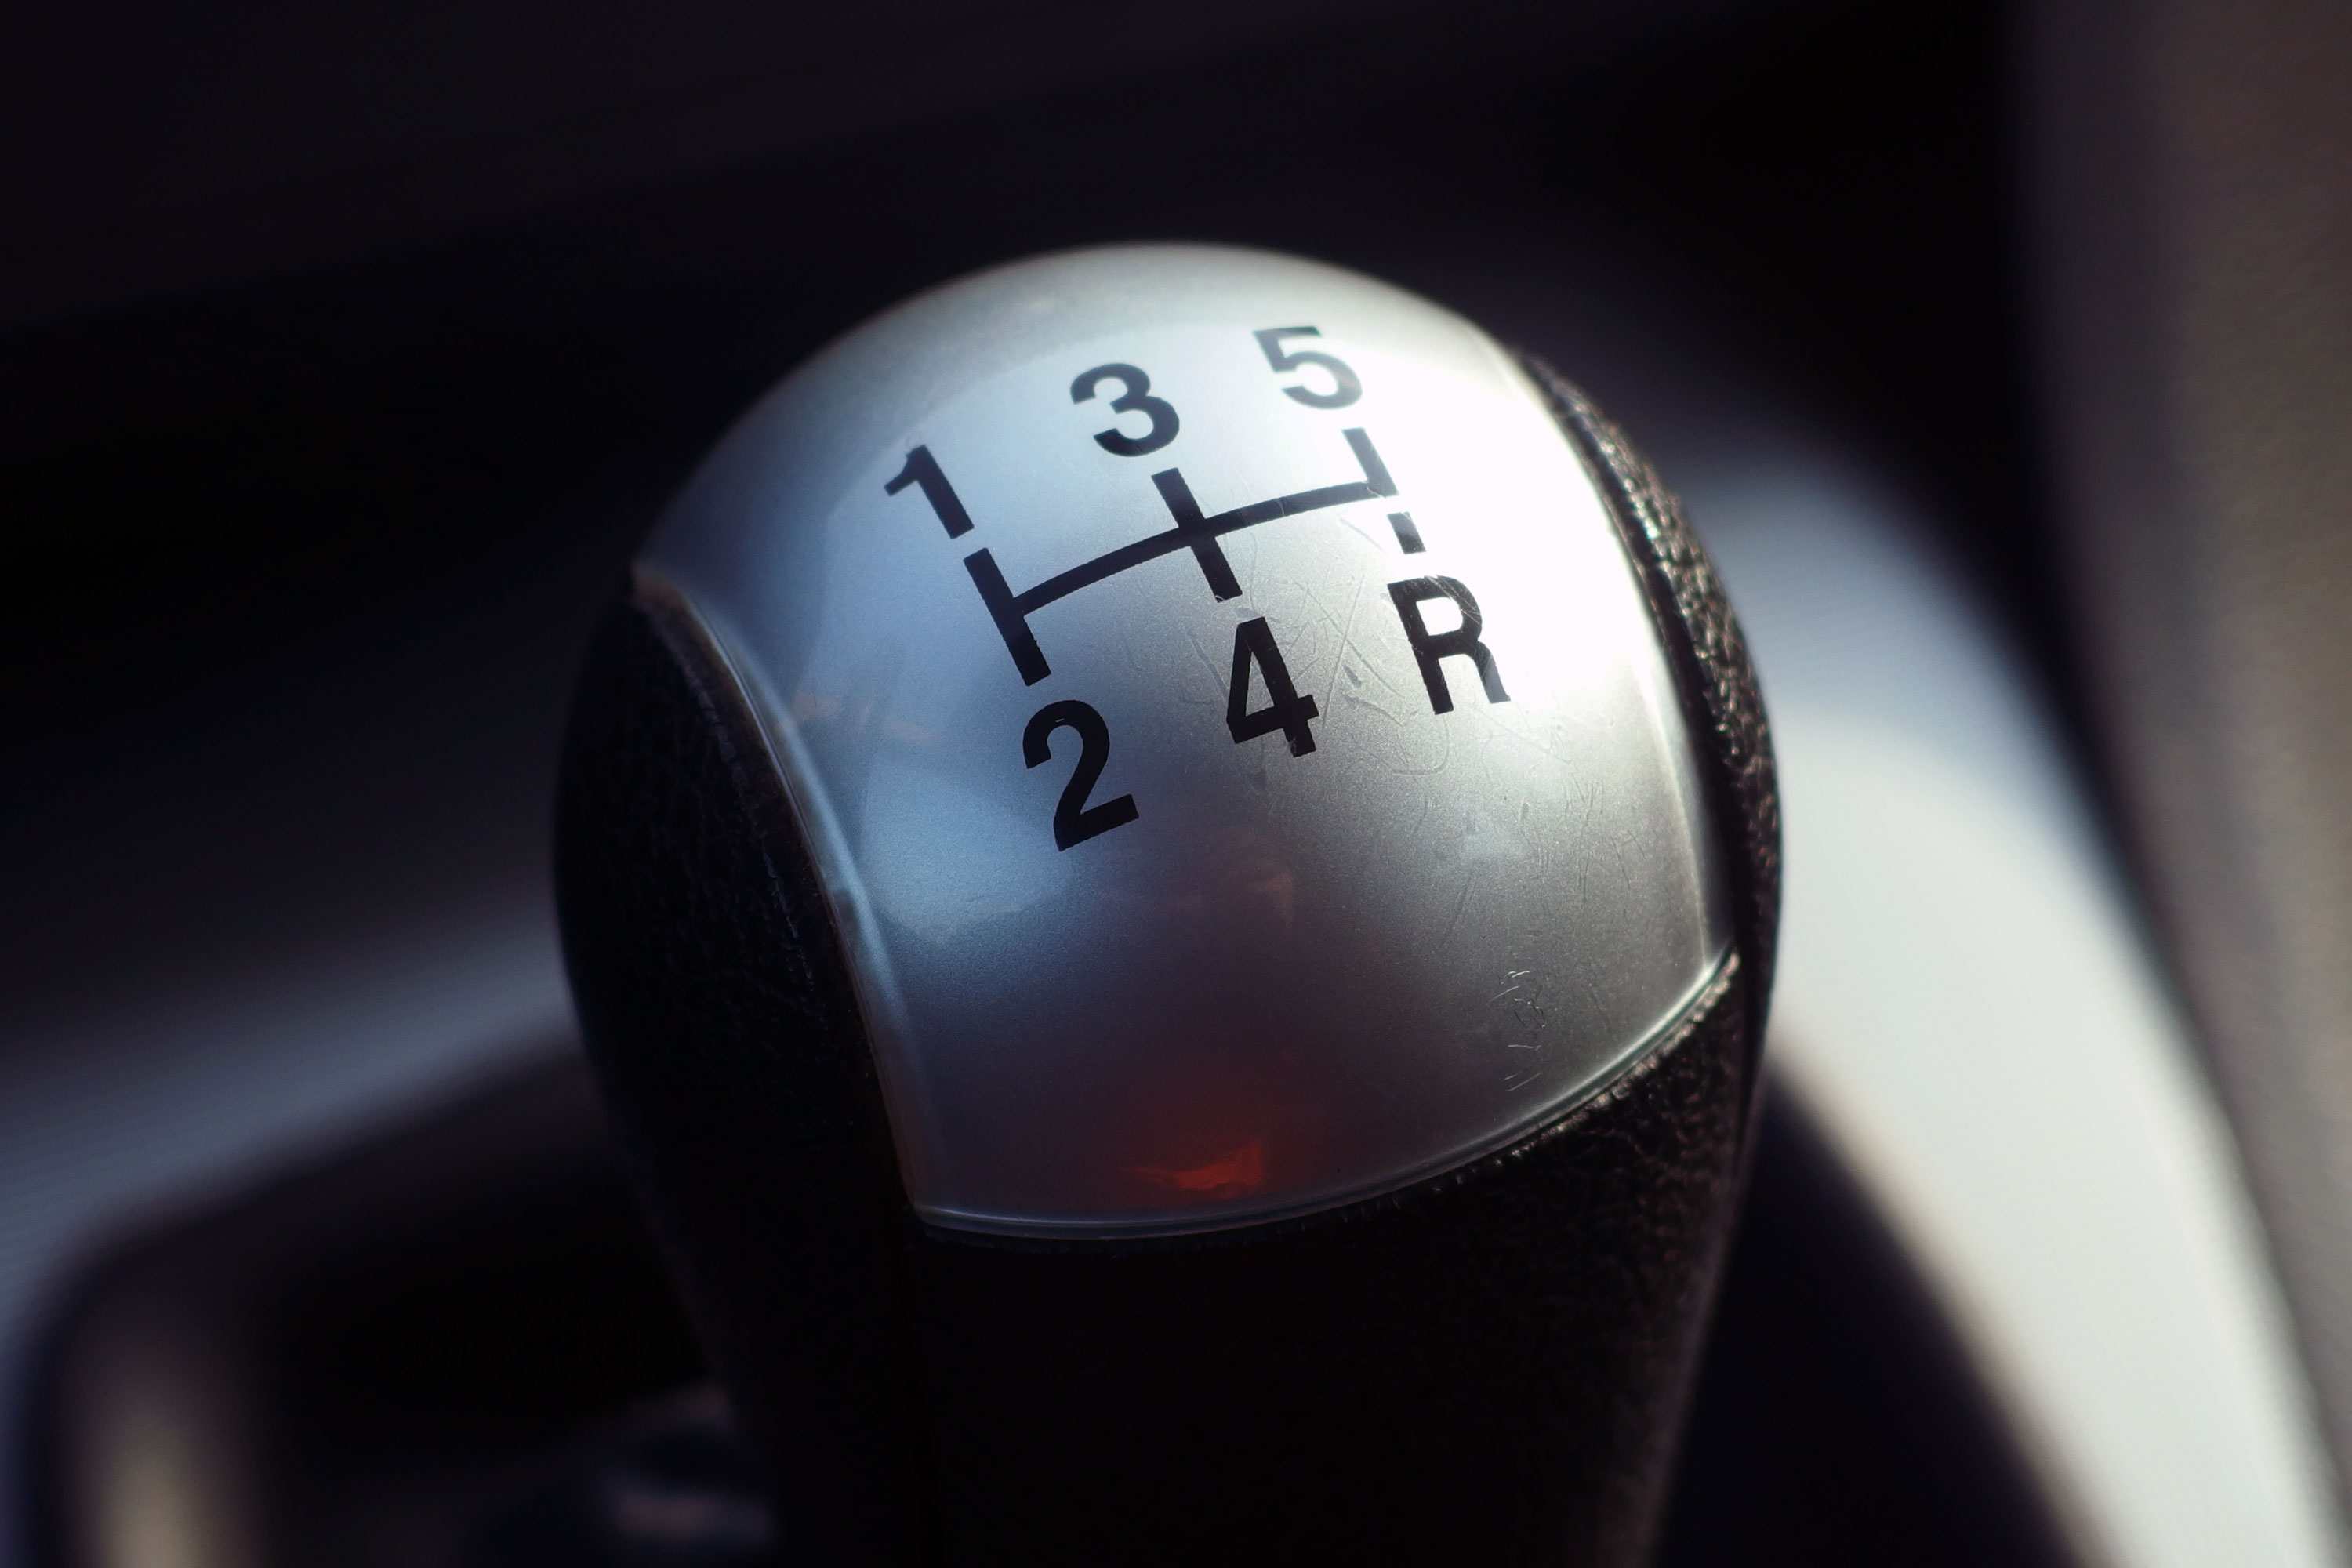 Gear Stick Free Stock Photo LibreS pic image